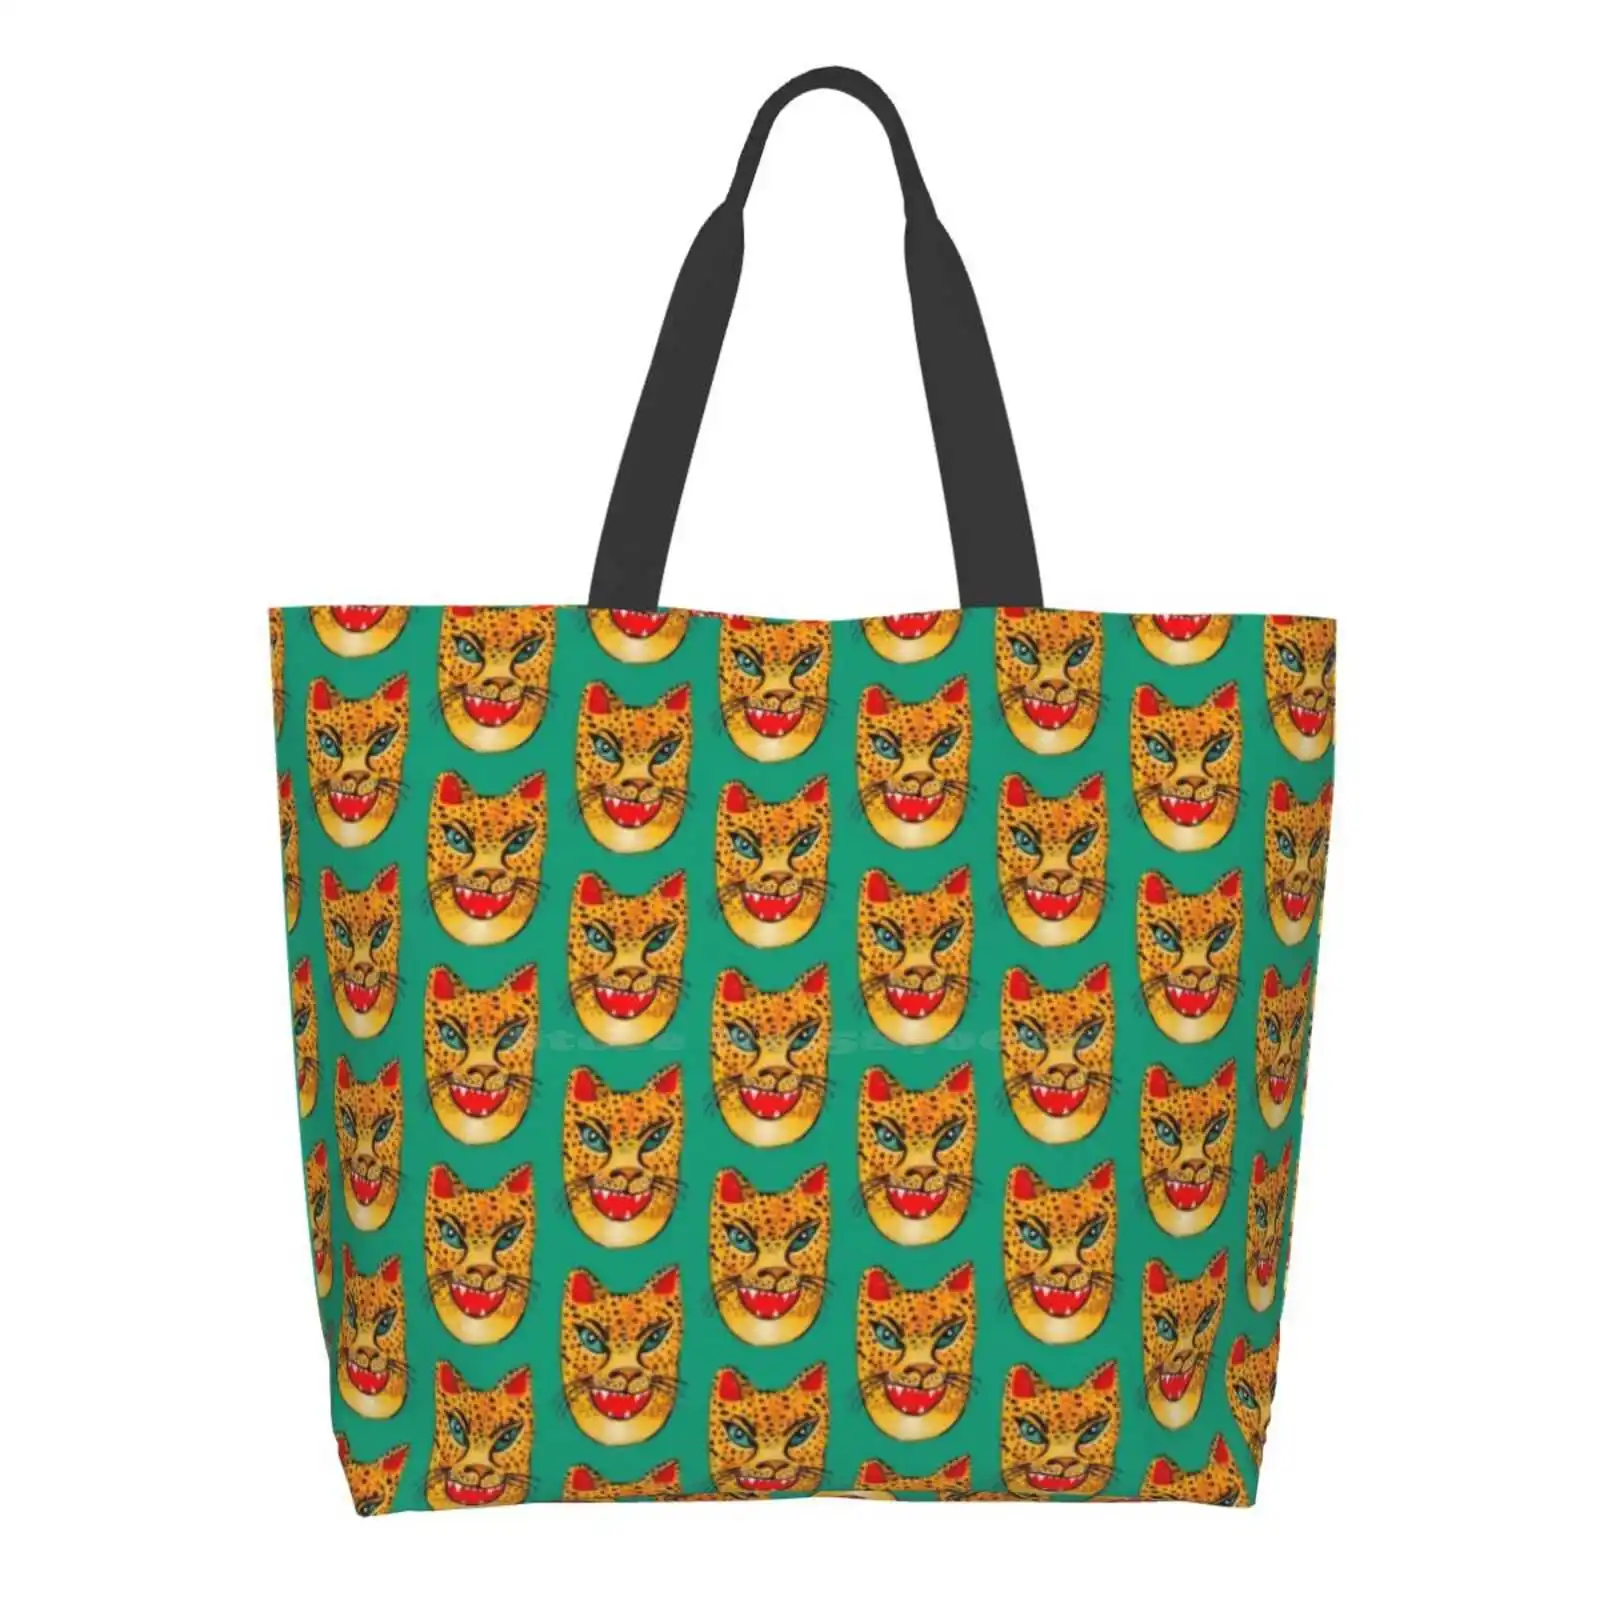 

Laughing Jaguar On Green Reusable Shopping Bag Tote Large Size Cat Meow Roar Cheetah Leopard Animals Animal Nature Watercolor